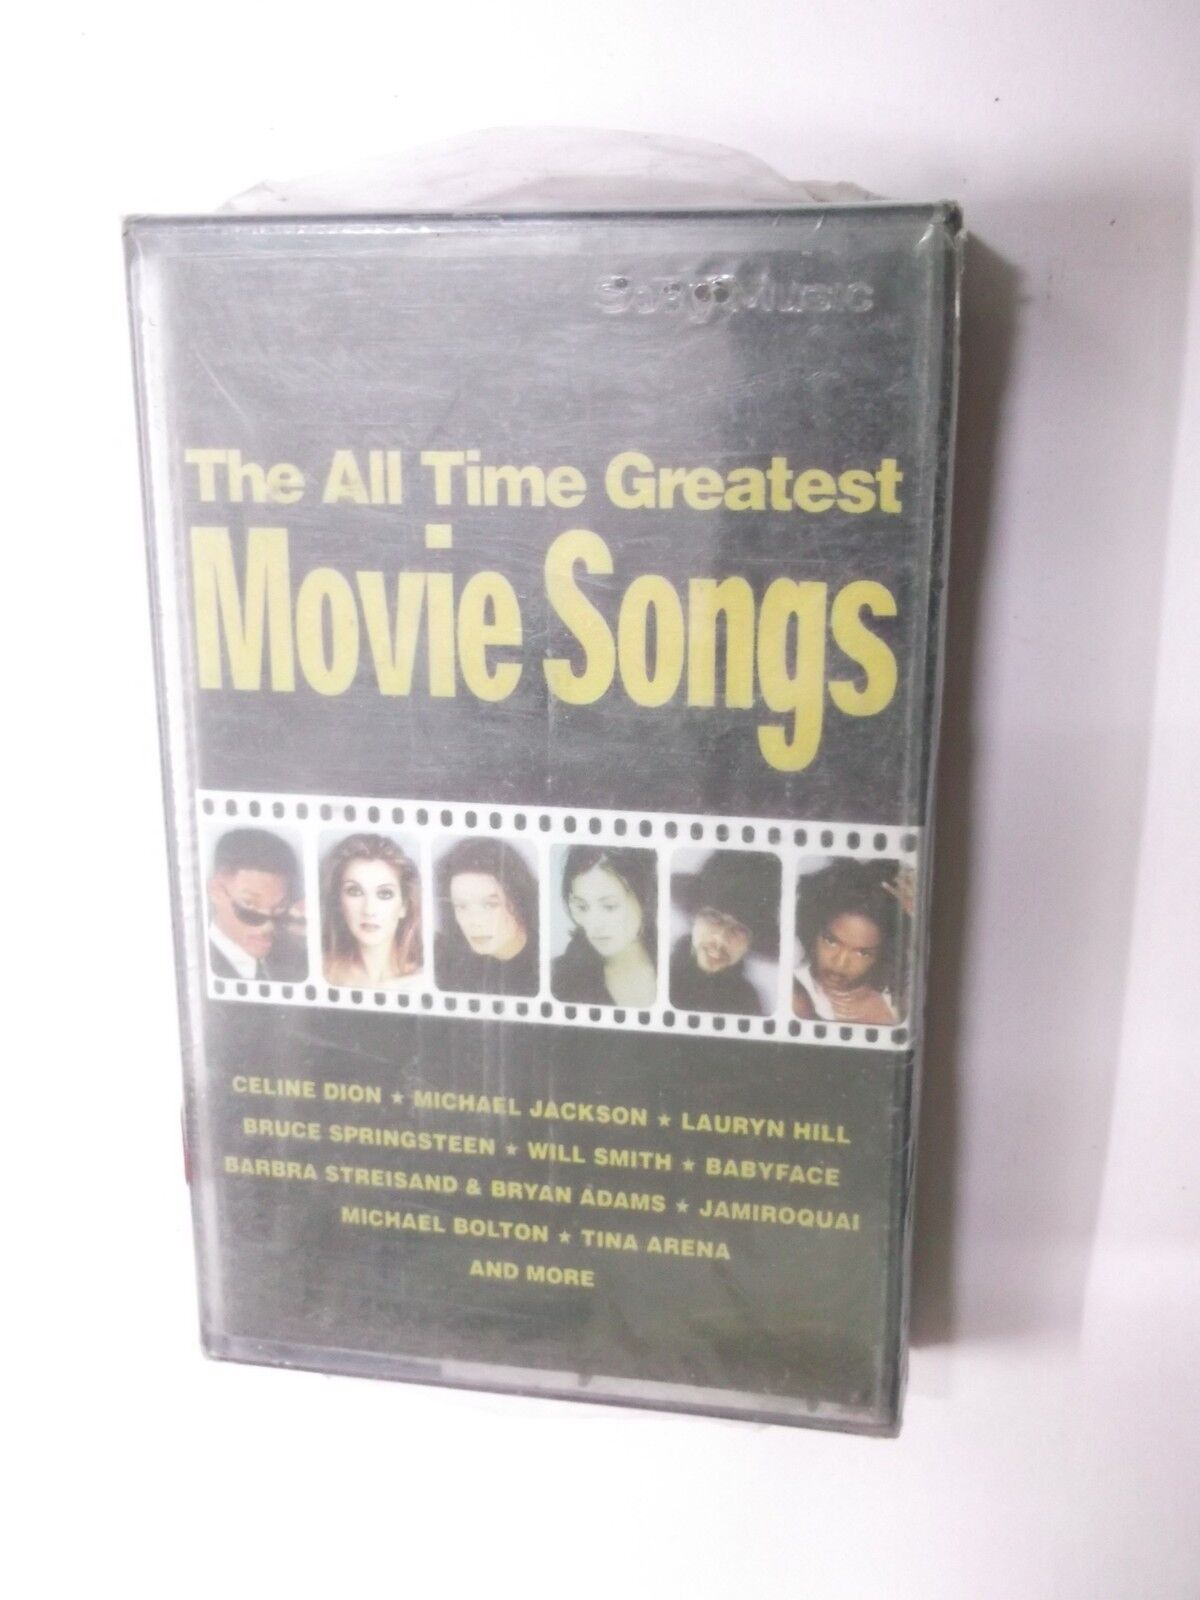 GREAT MOVIE SONG CELINE DION JACKSON WILL SMITH BABYFACE SEALED CASSETTE INDIA